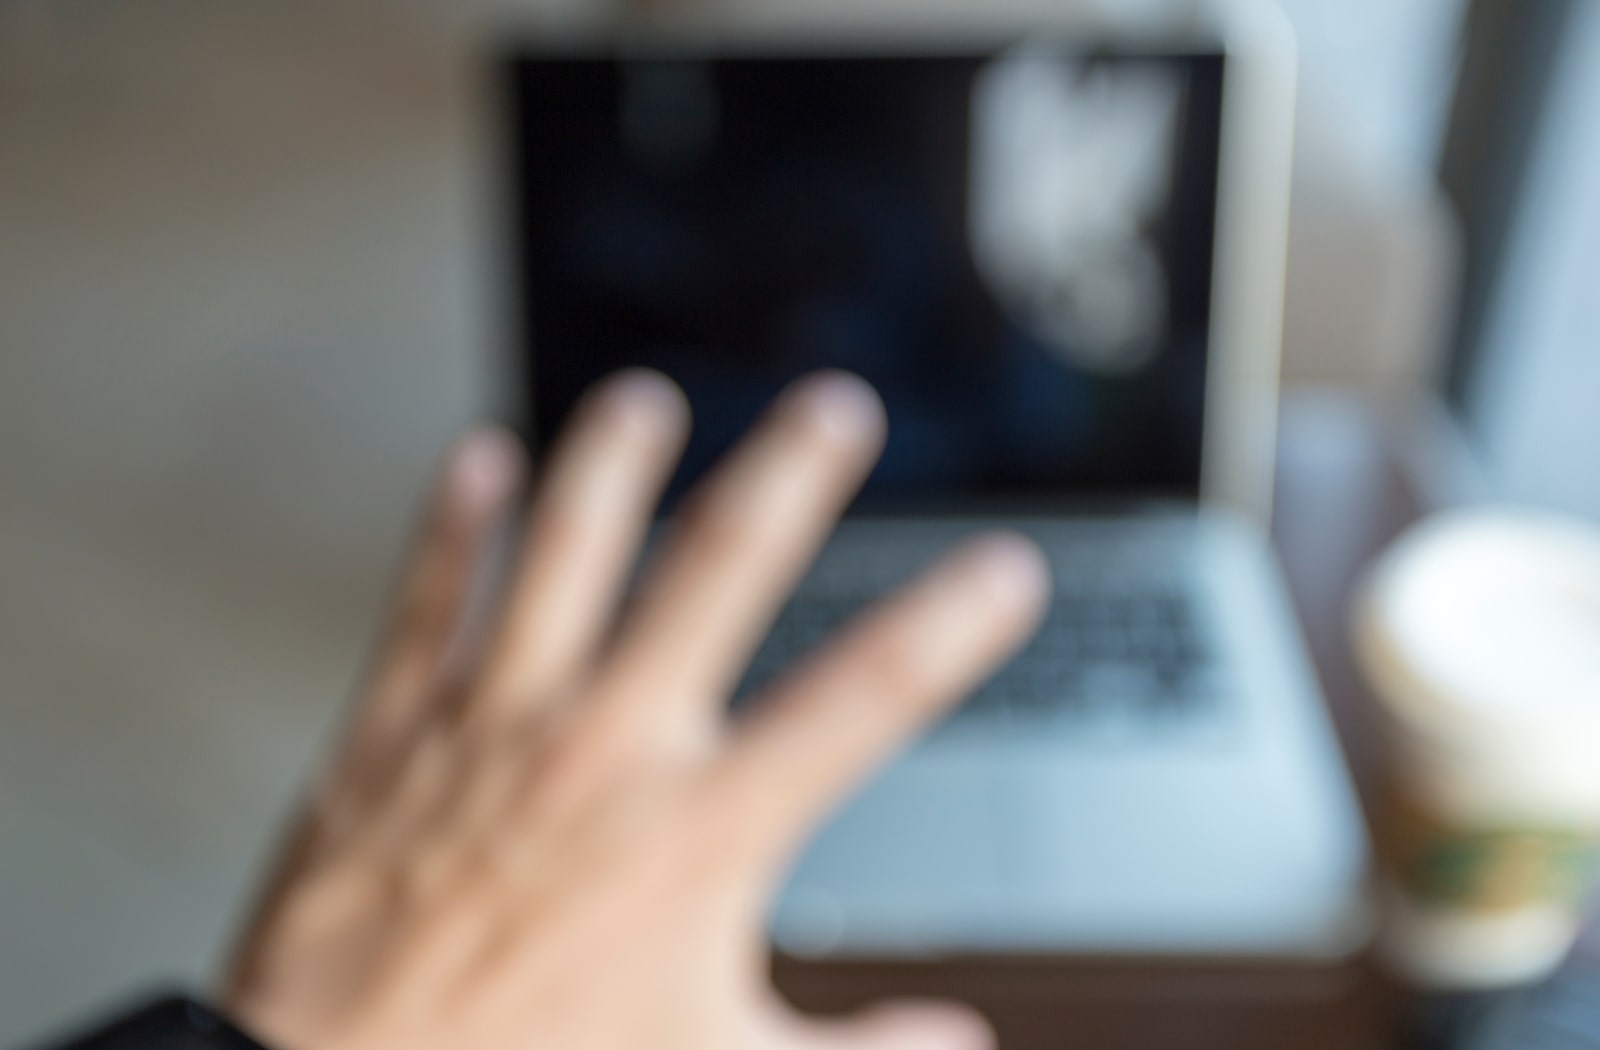  A blurred image of a man reaching out towards his computer